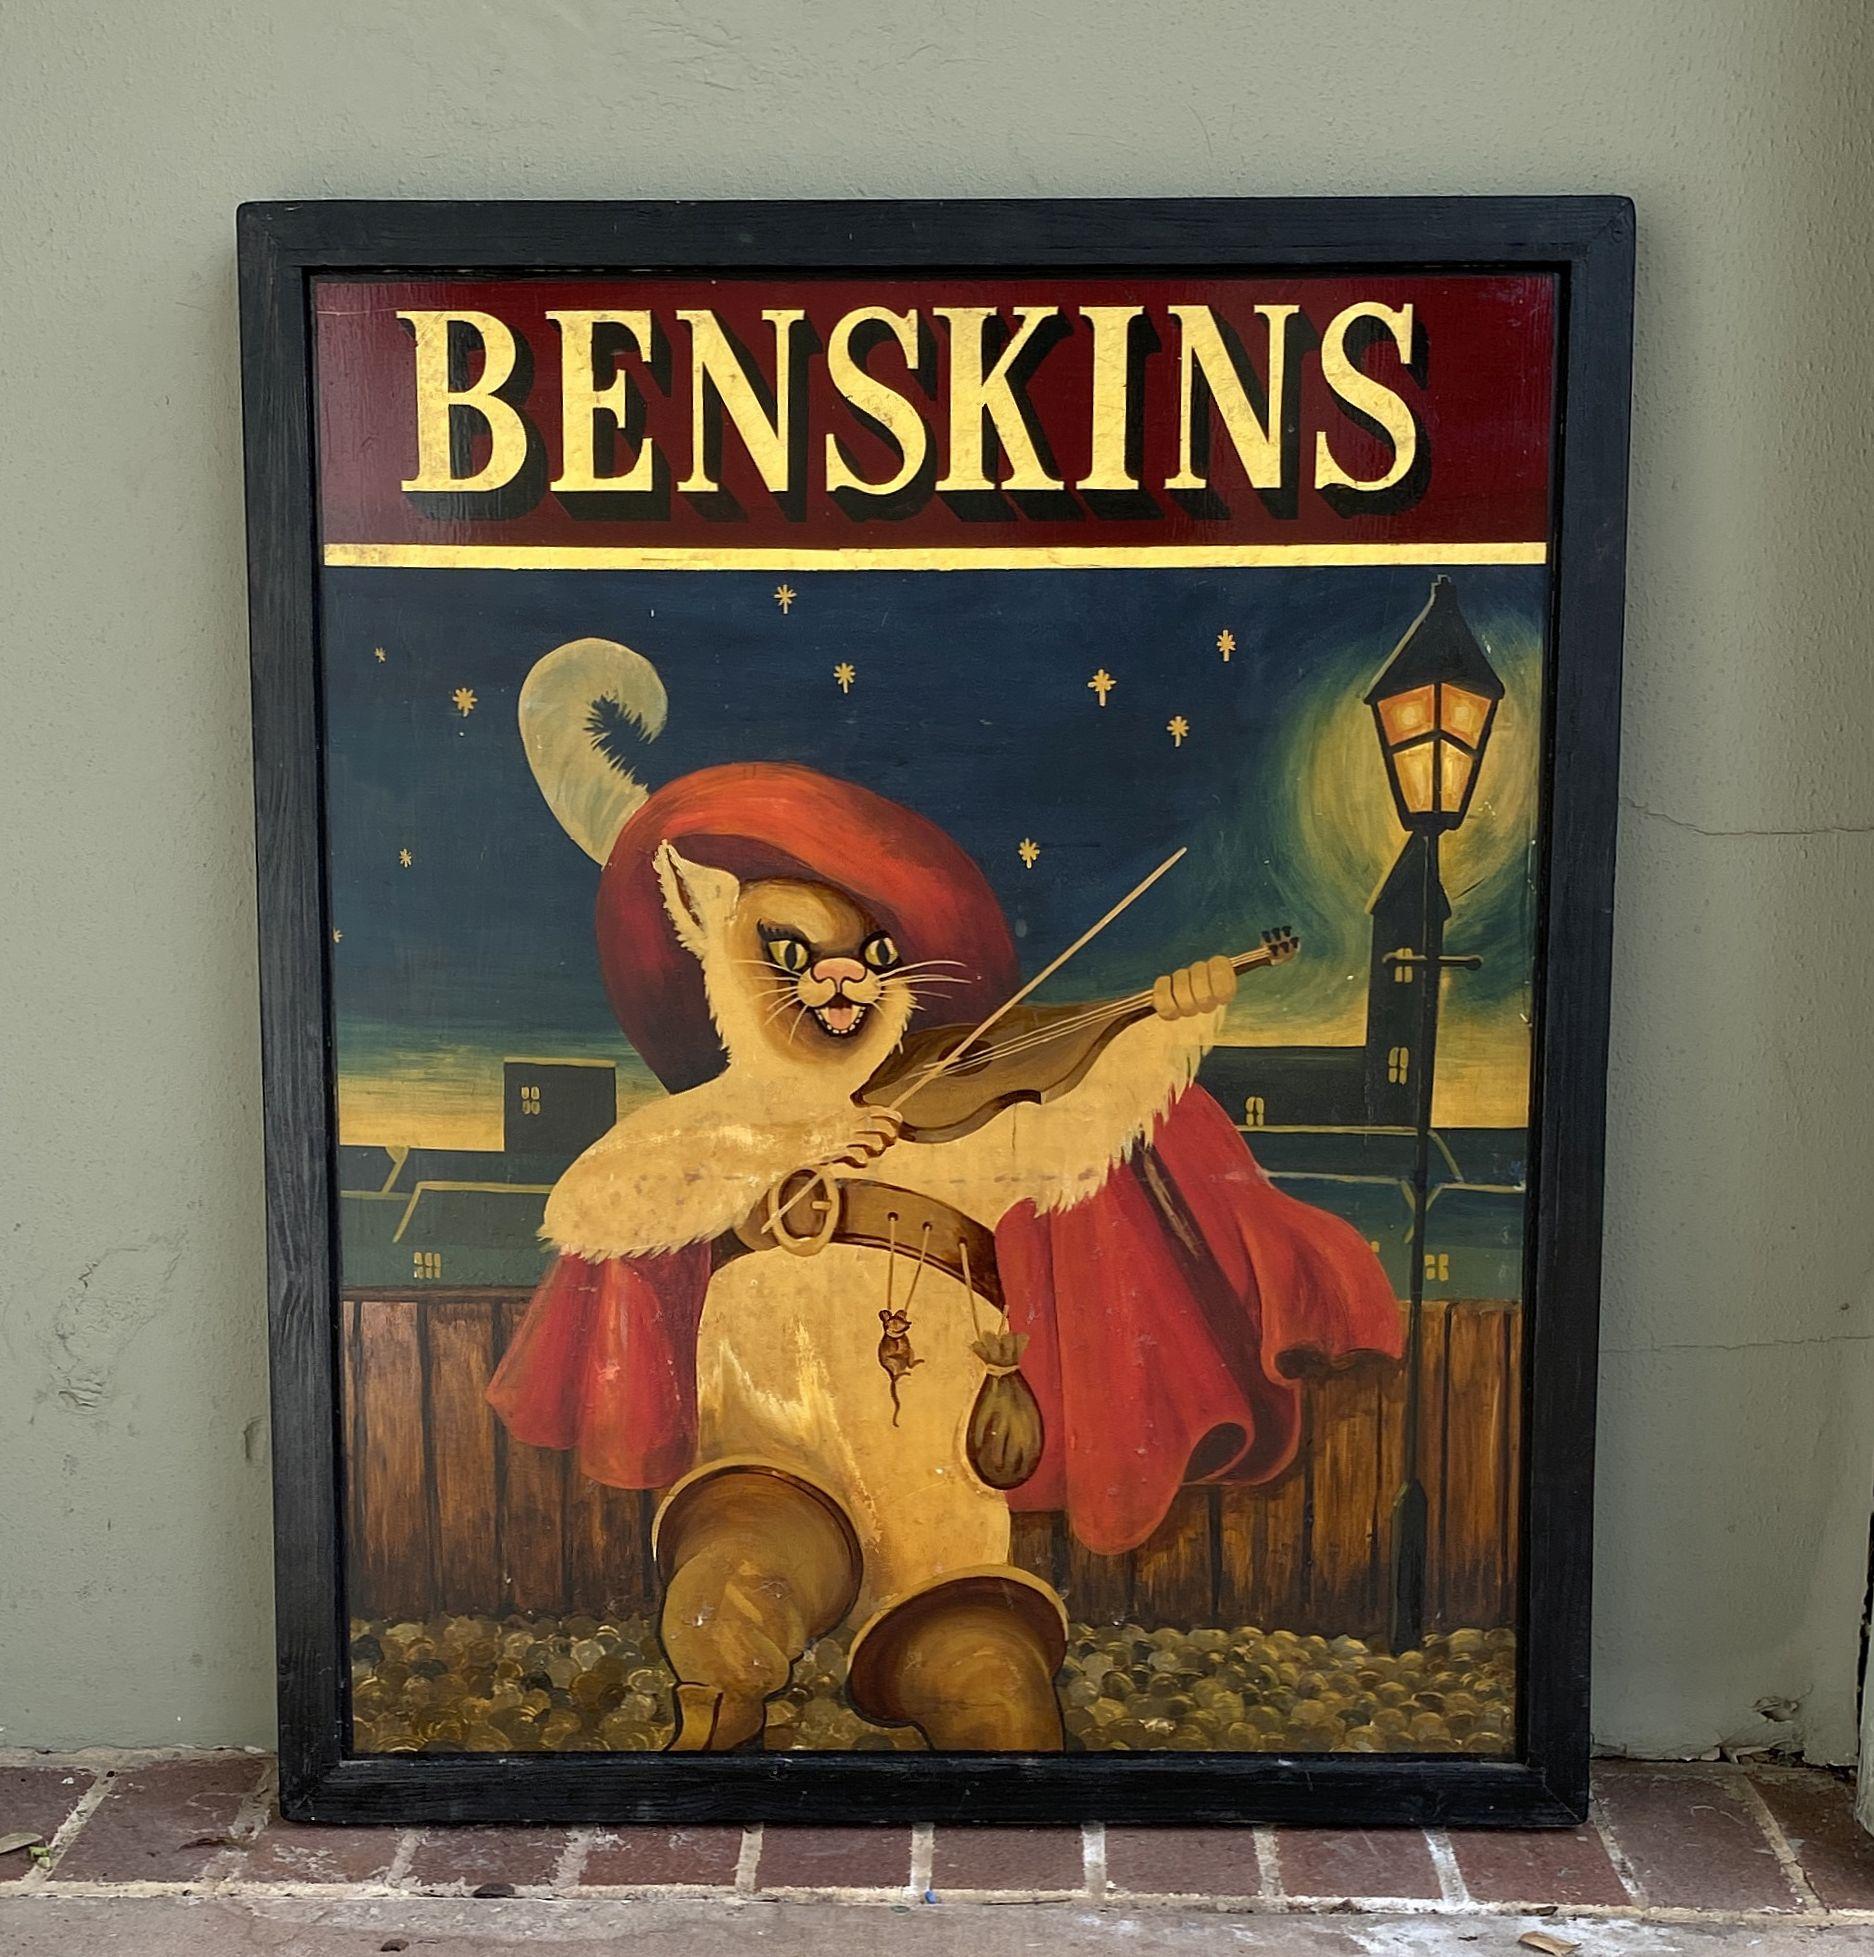 An authentic English pub sign (one-sided) featuring a painting of a cat playing a violin fiddle - from the beloved fairy tale Puss In Boots - in the light of a streetlamp at night, entitled: Benskins.

A very fine example of vintage advertising